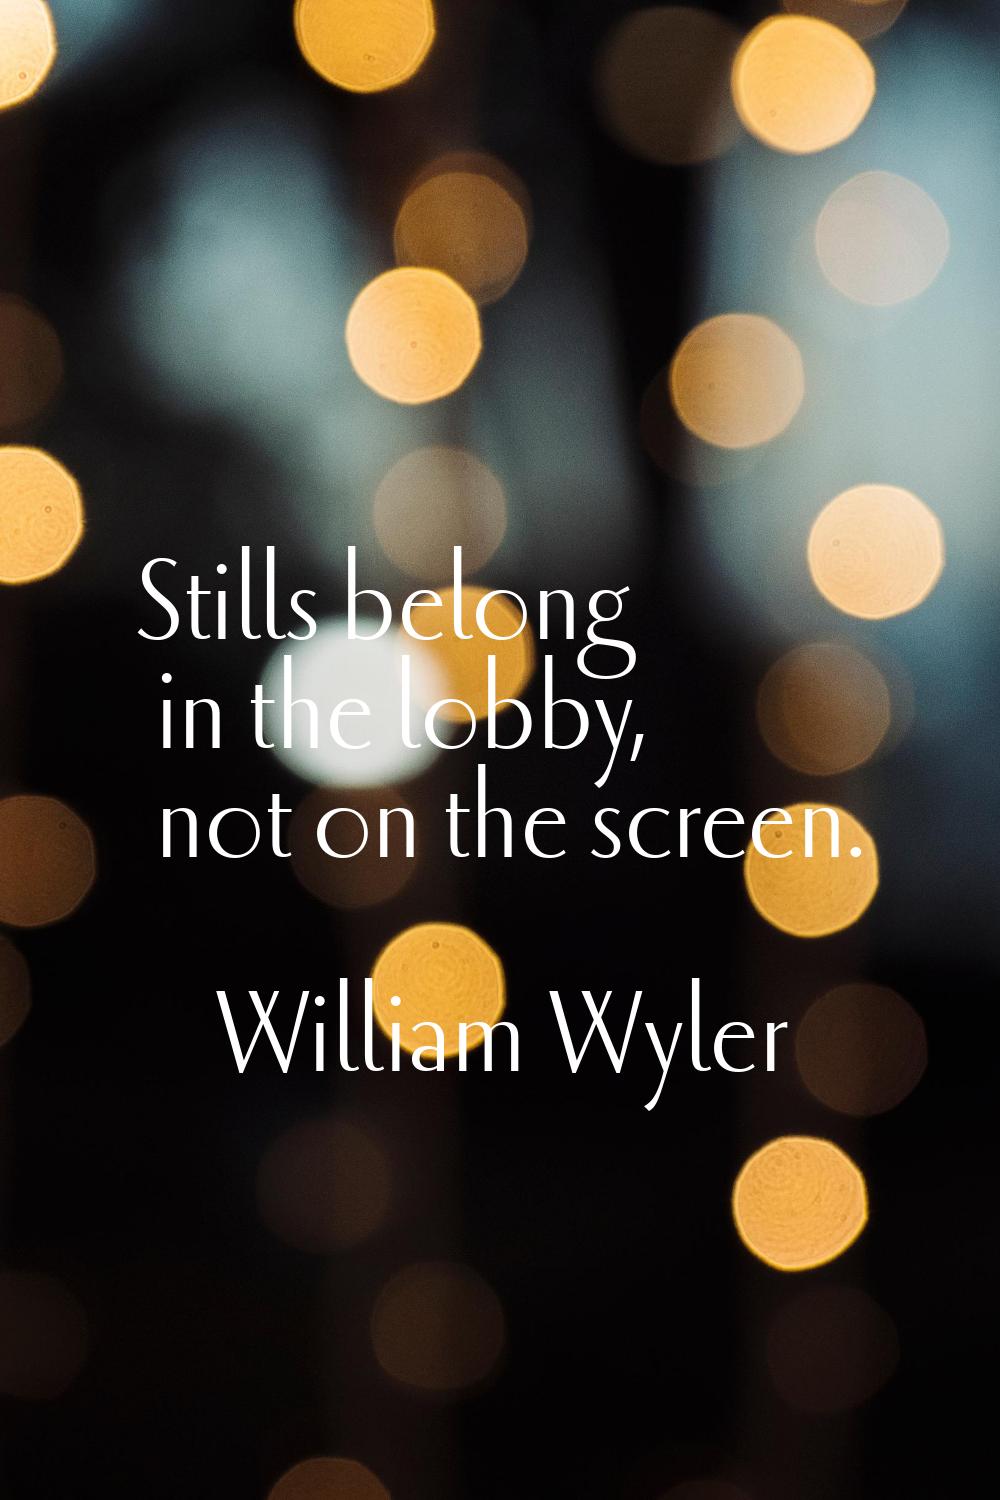 Stills belong in the lobby, not on the screen.